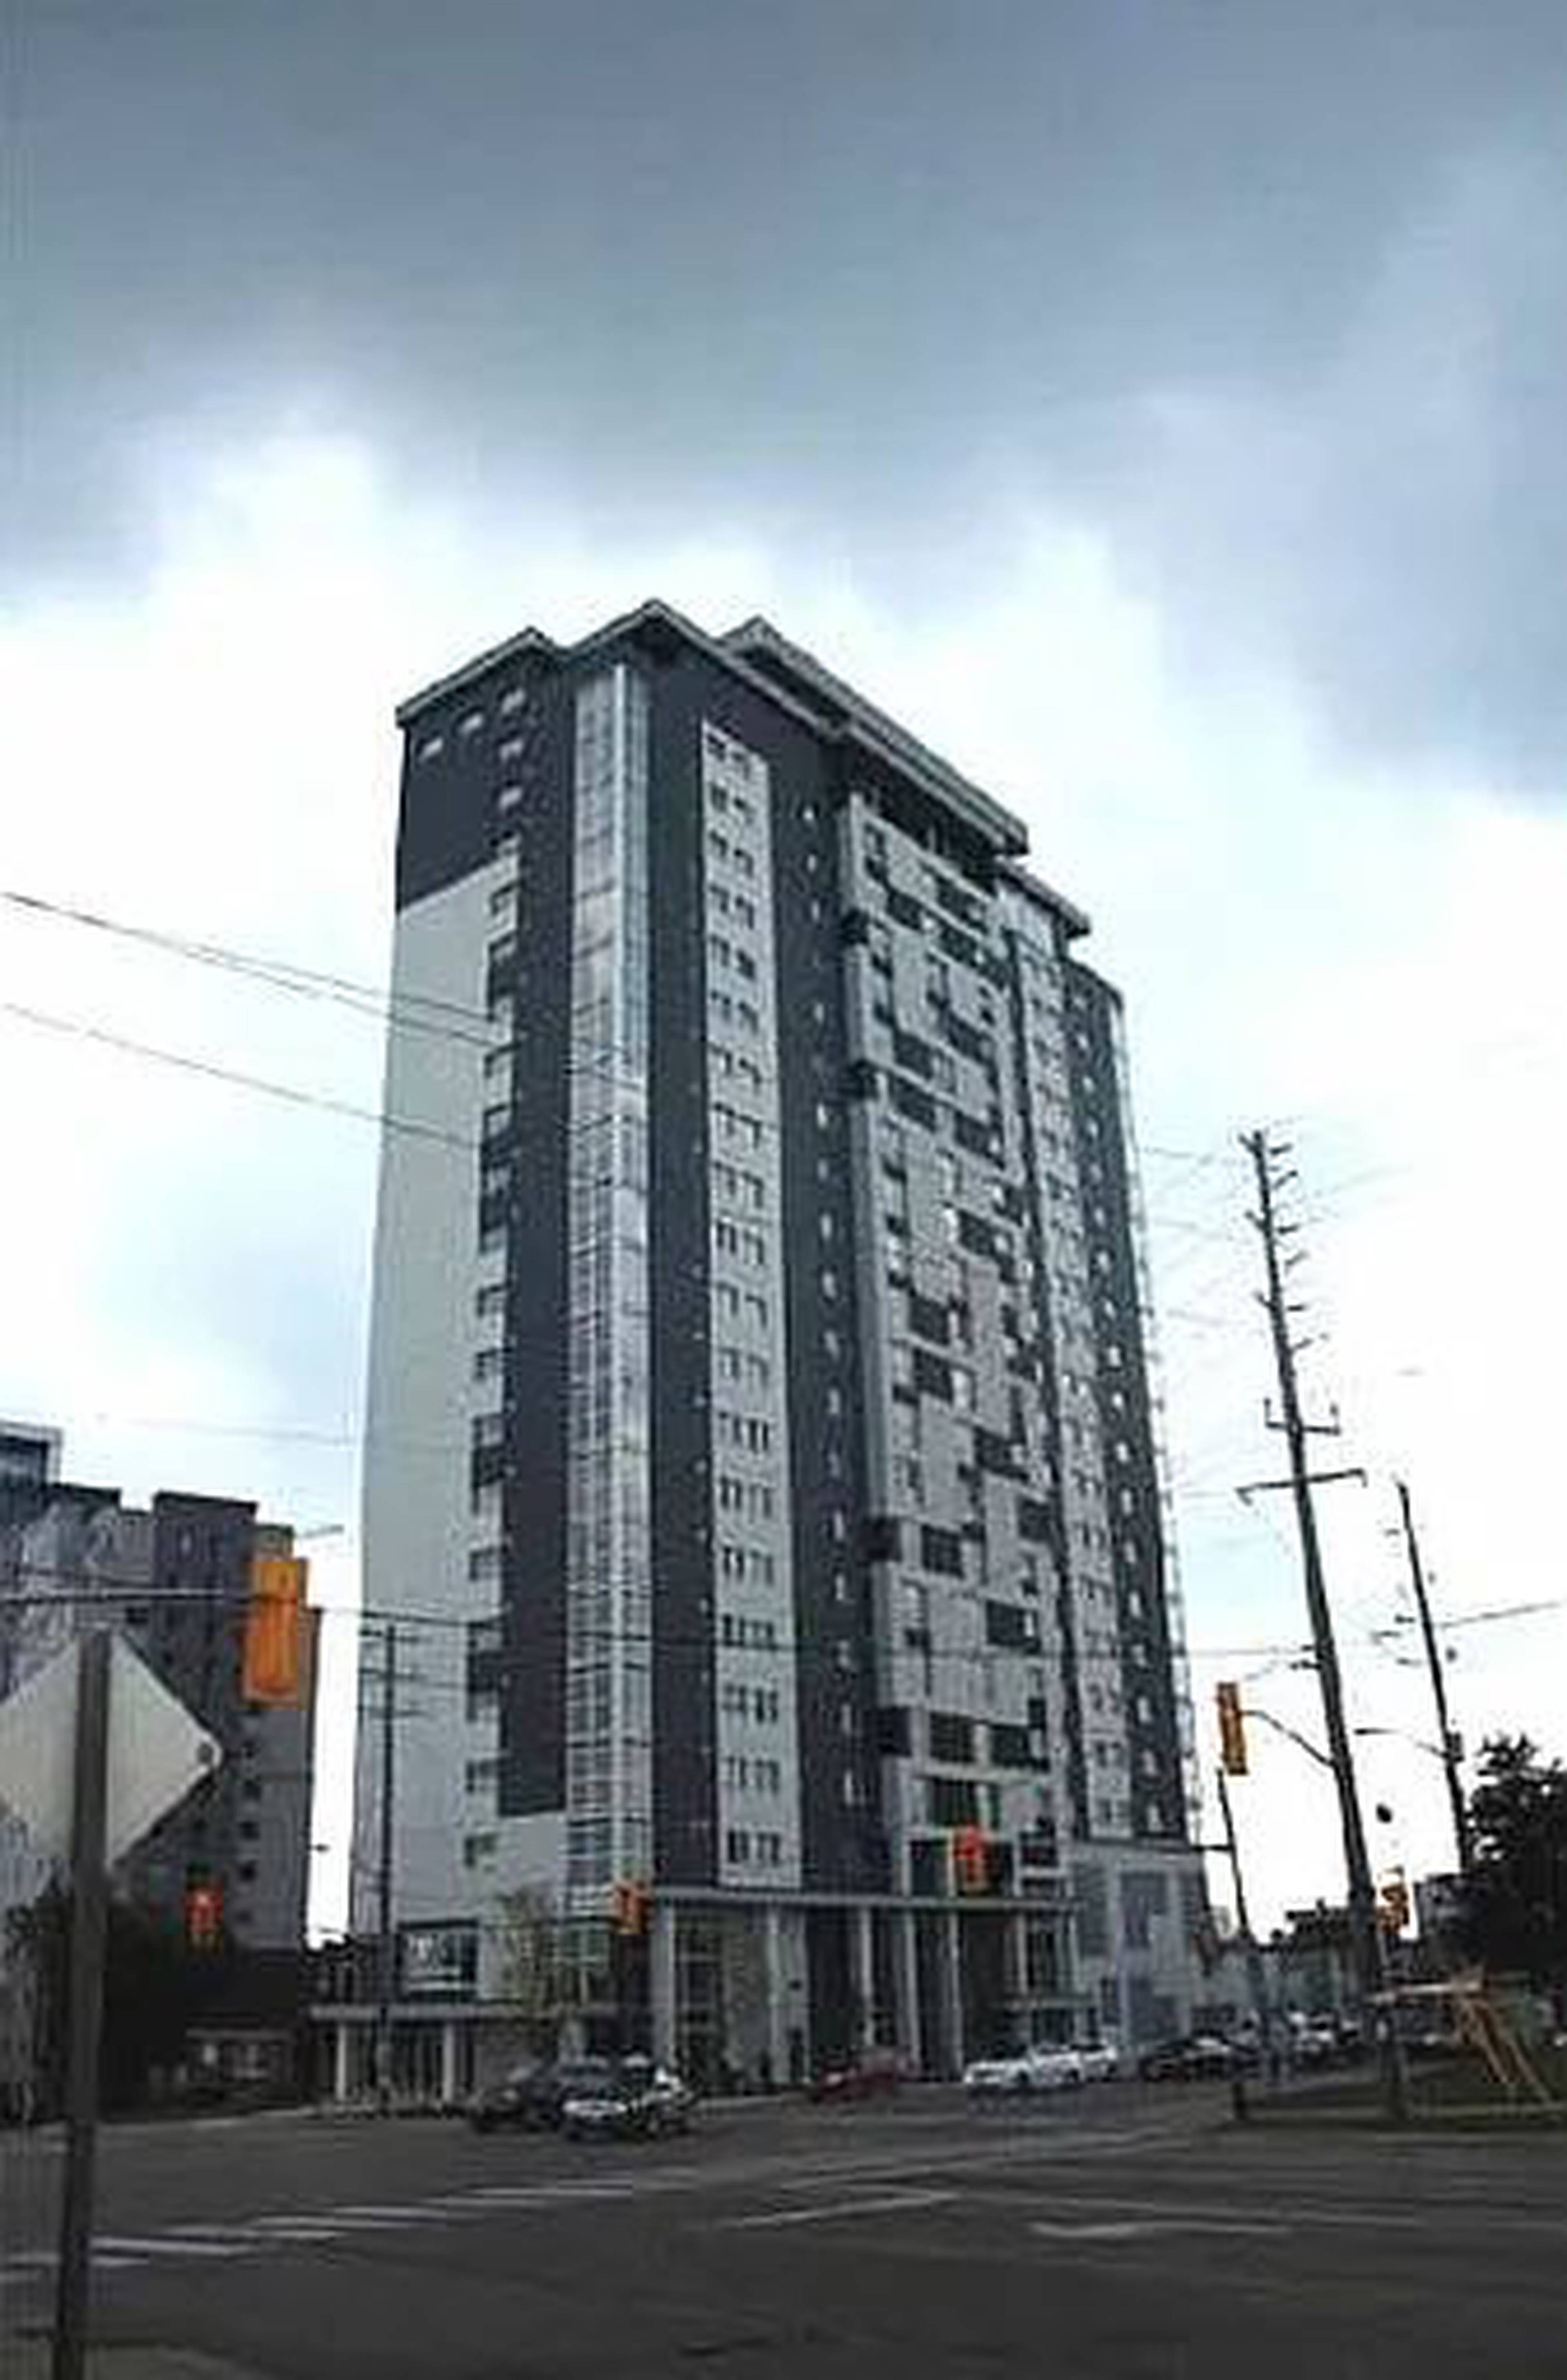 The Marq Waterloo Apartment Building